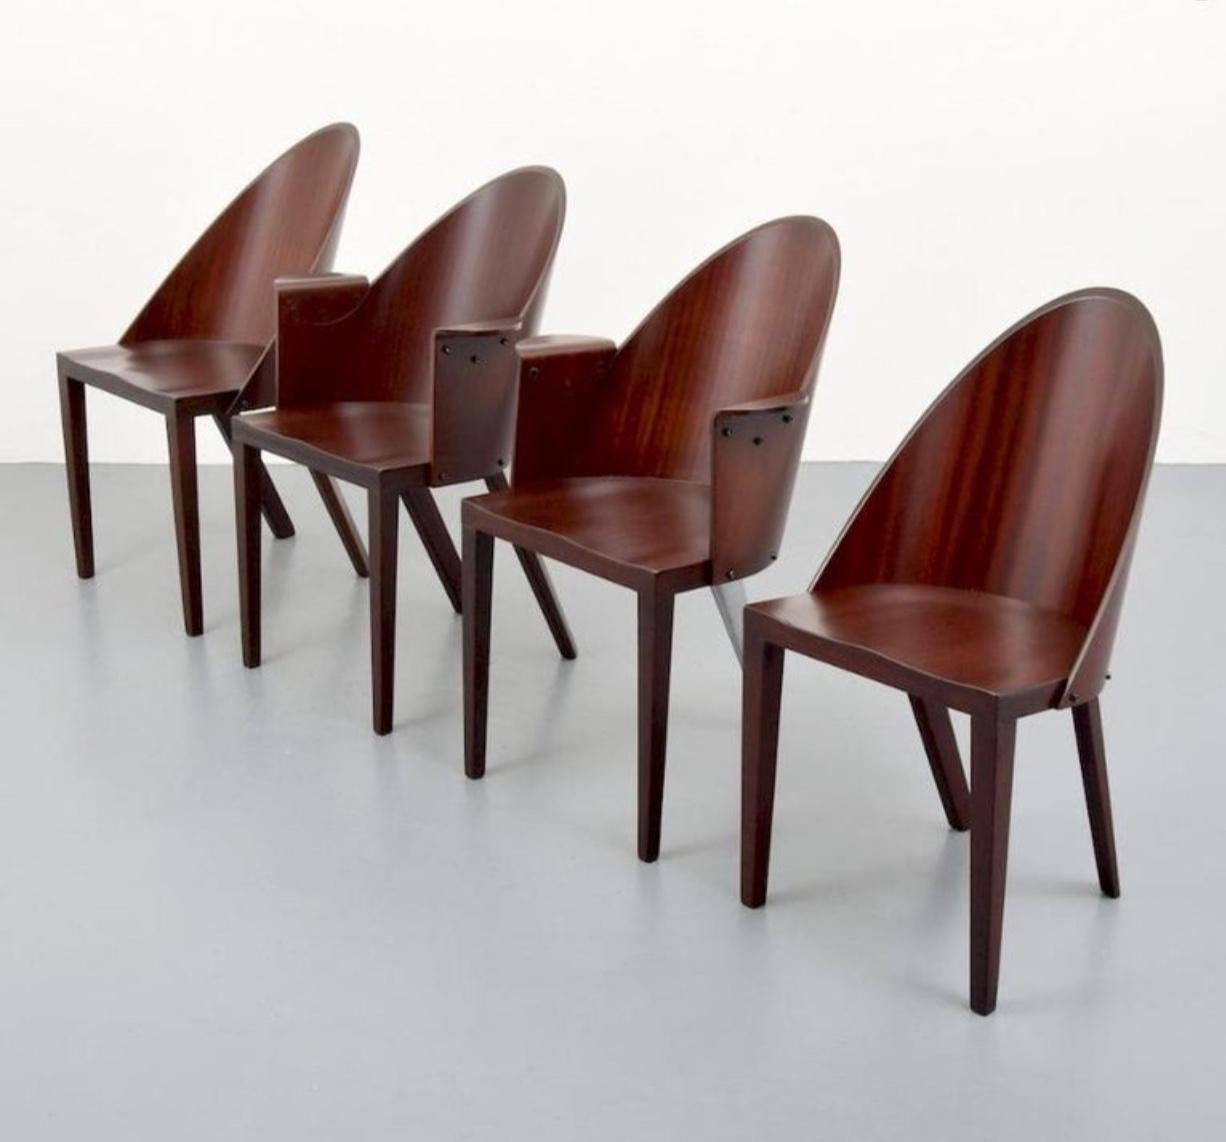 Set of 4 Rare Philippe Starck Chairs from the Royalton Hotel, NYC For Sale 2